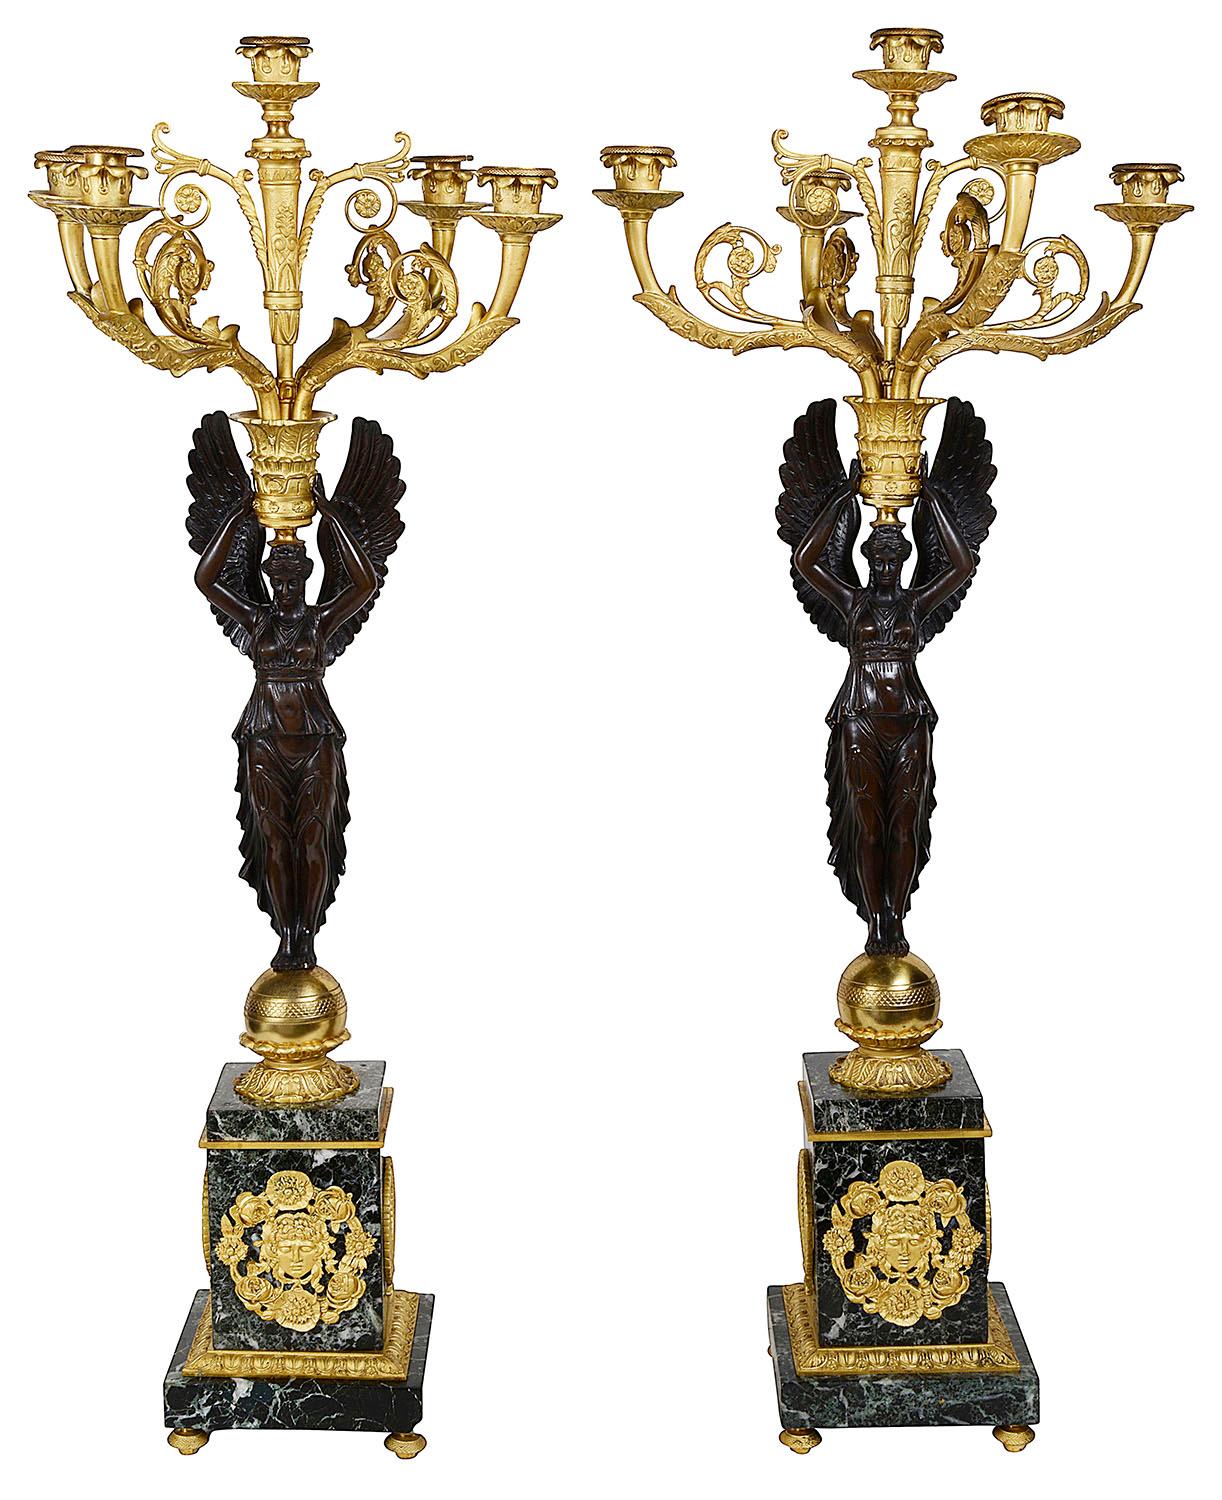 A very impressive and fine quality 19th century French Empire influenced clock set. Having a pair of winged female figures supporting five branch candelabra with scrolling foliate decoration, raised on gilded globes and green marble plinths with